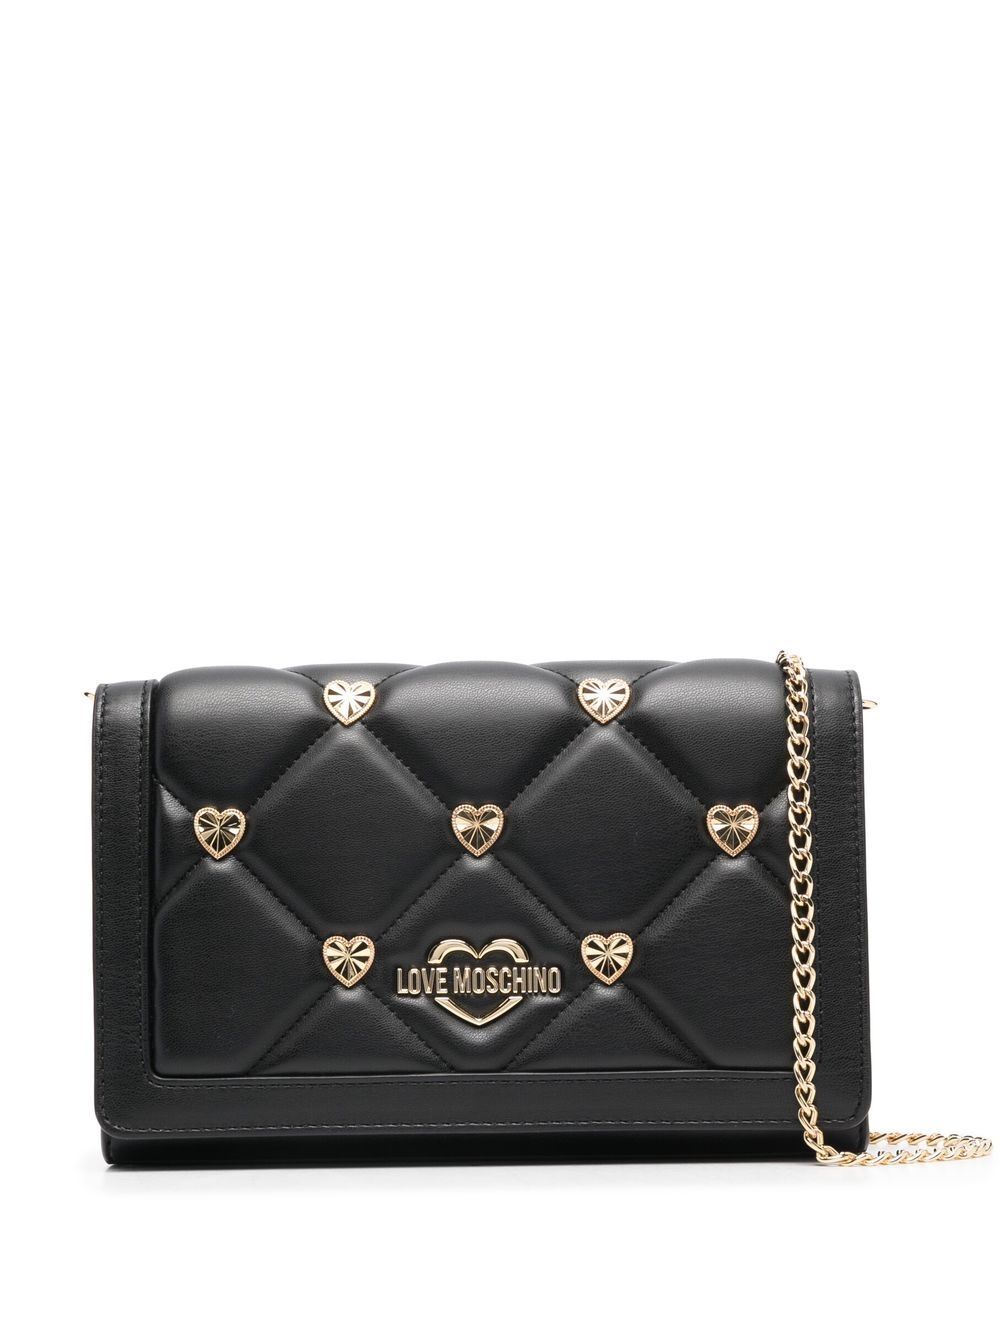 Love Moschino quilted heart stud cross body bag - Black